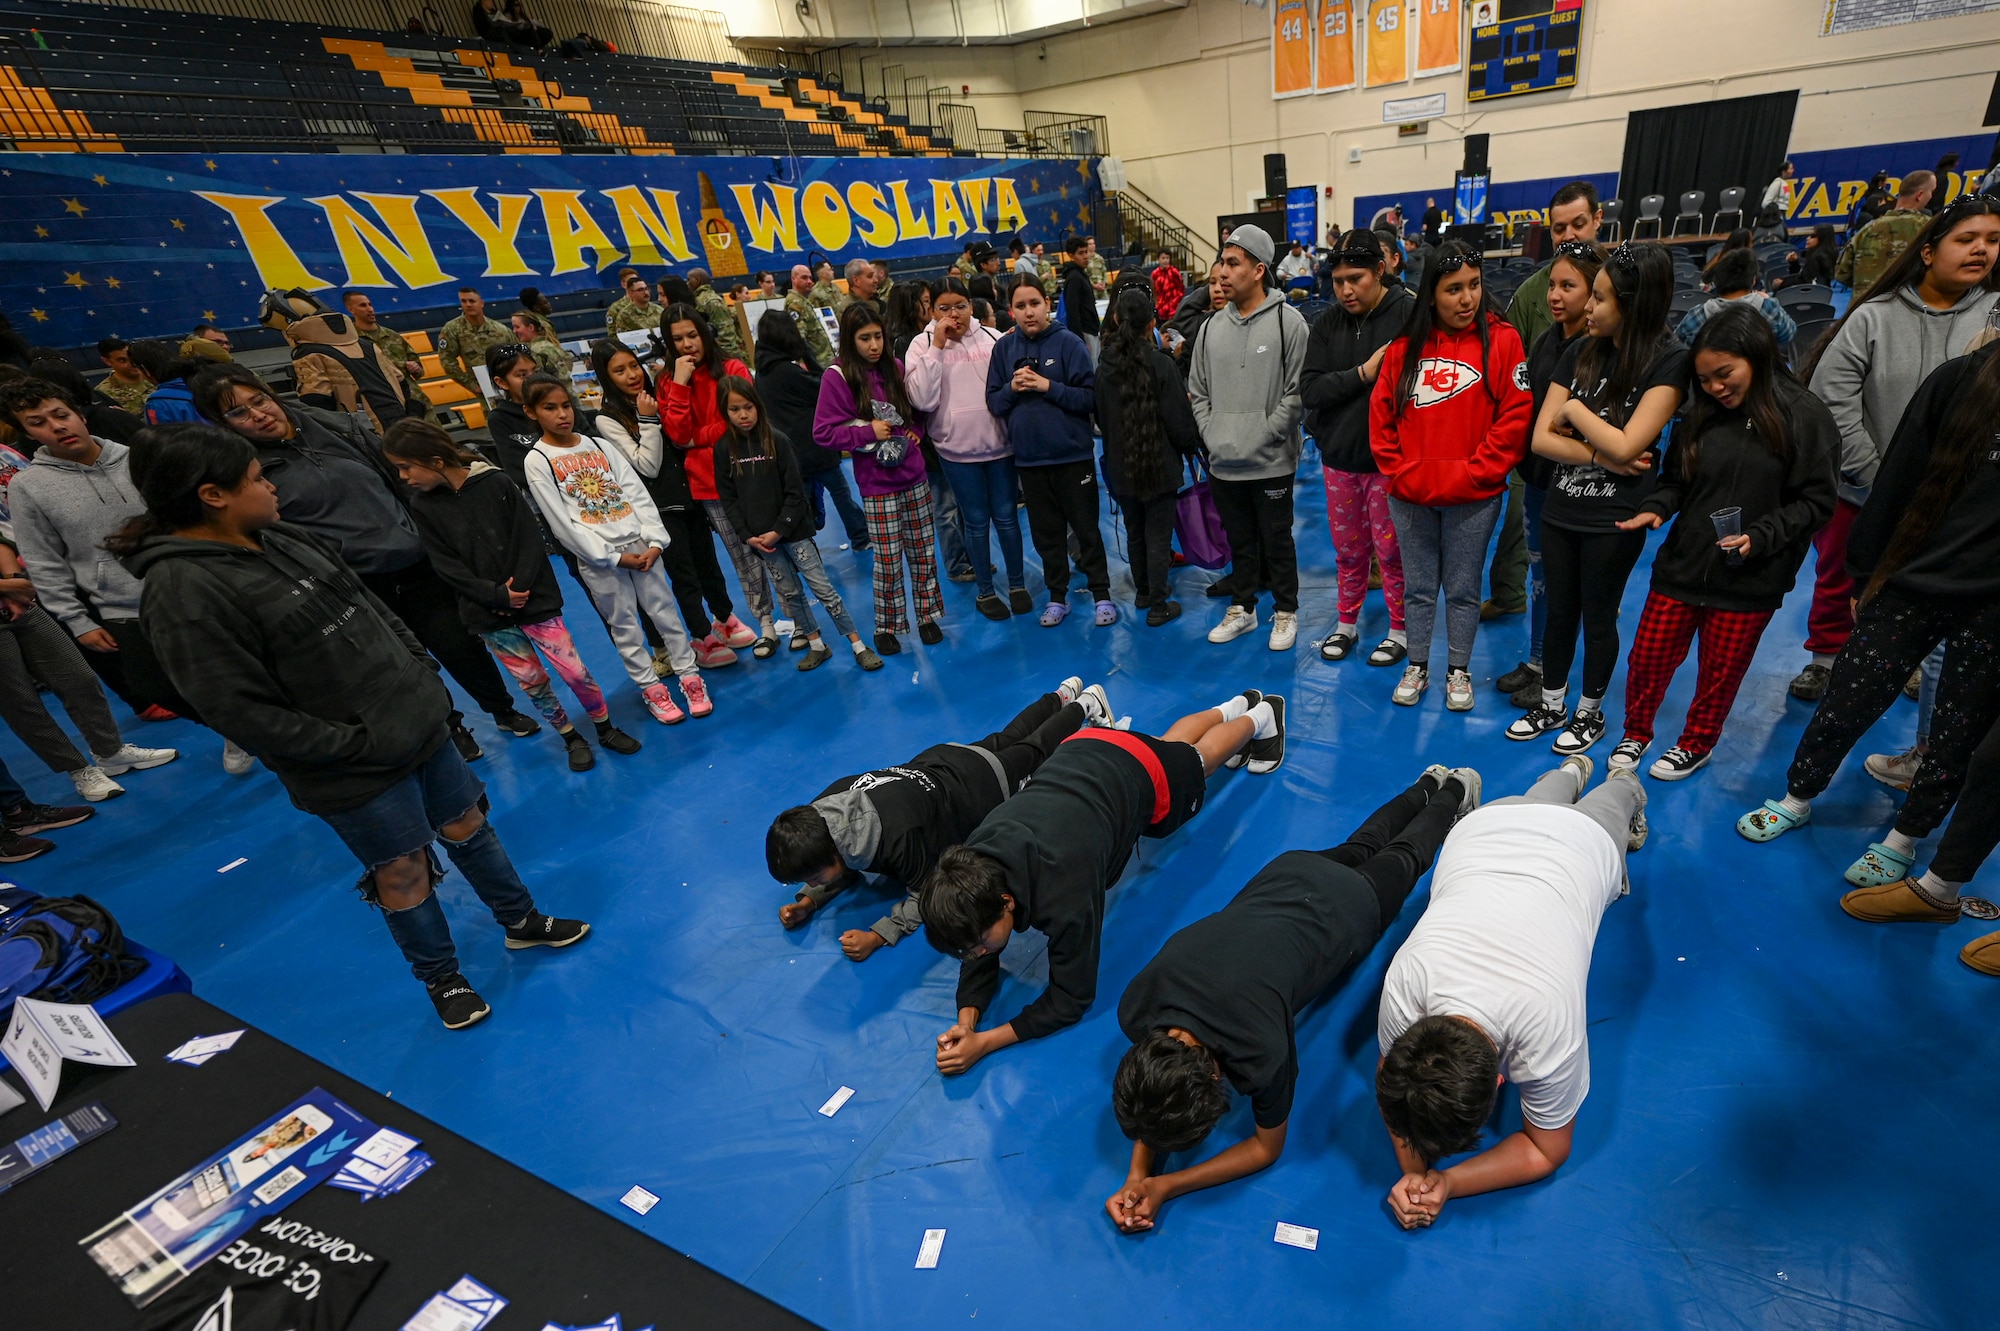 Students gather around other students doing exercises for a contest.